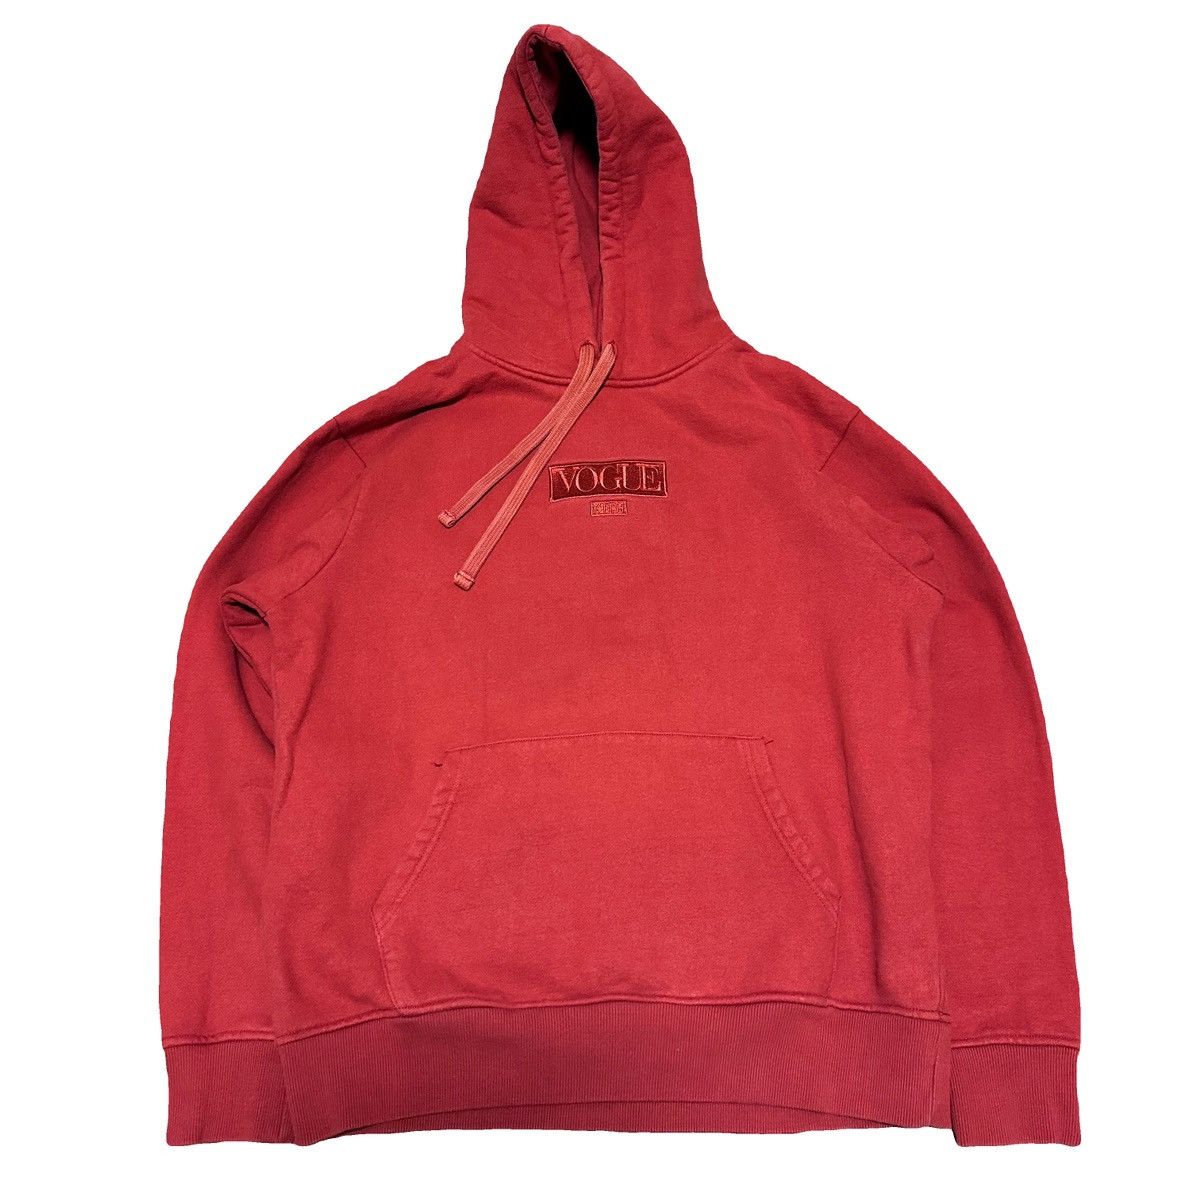 Kith Kith x Russell Athletic x Vogue Hoodie | Grailed